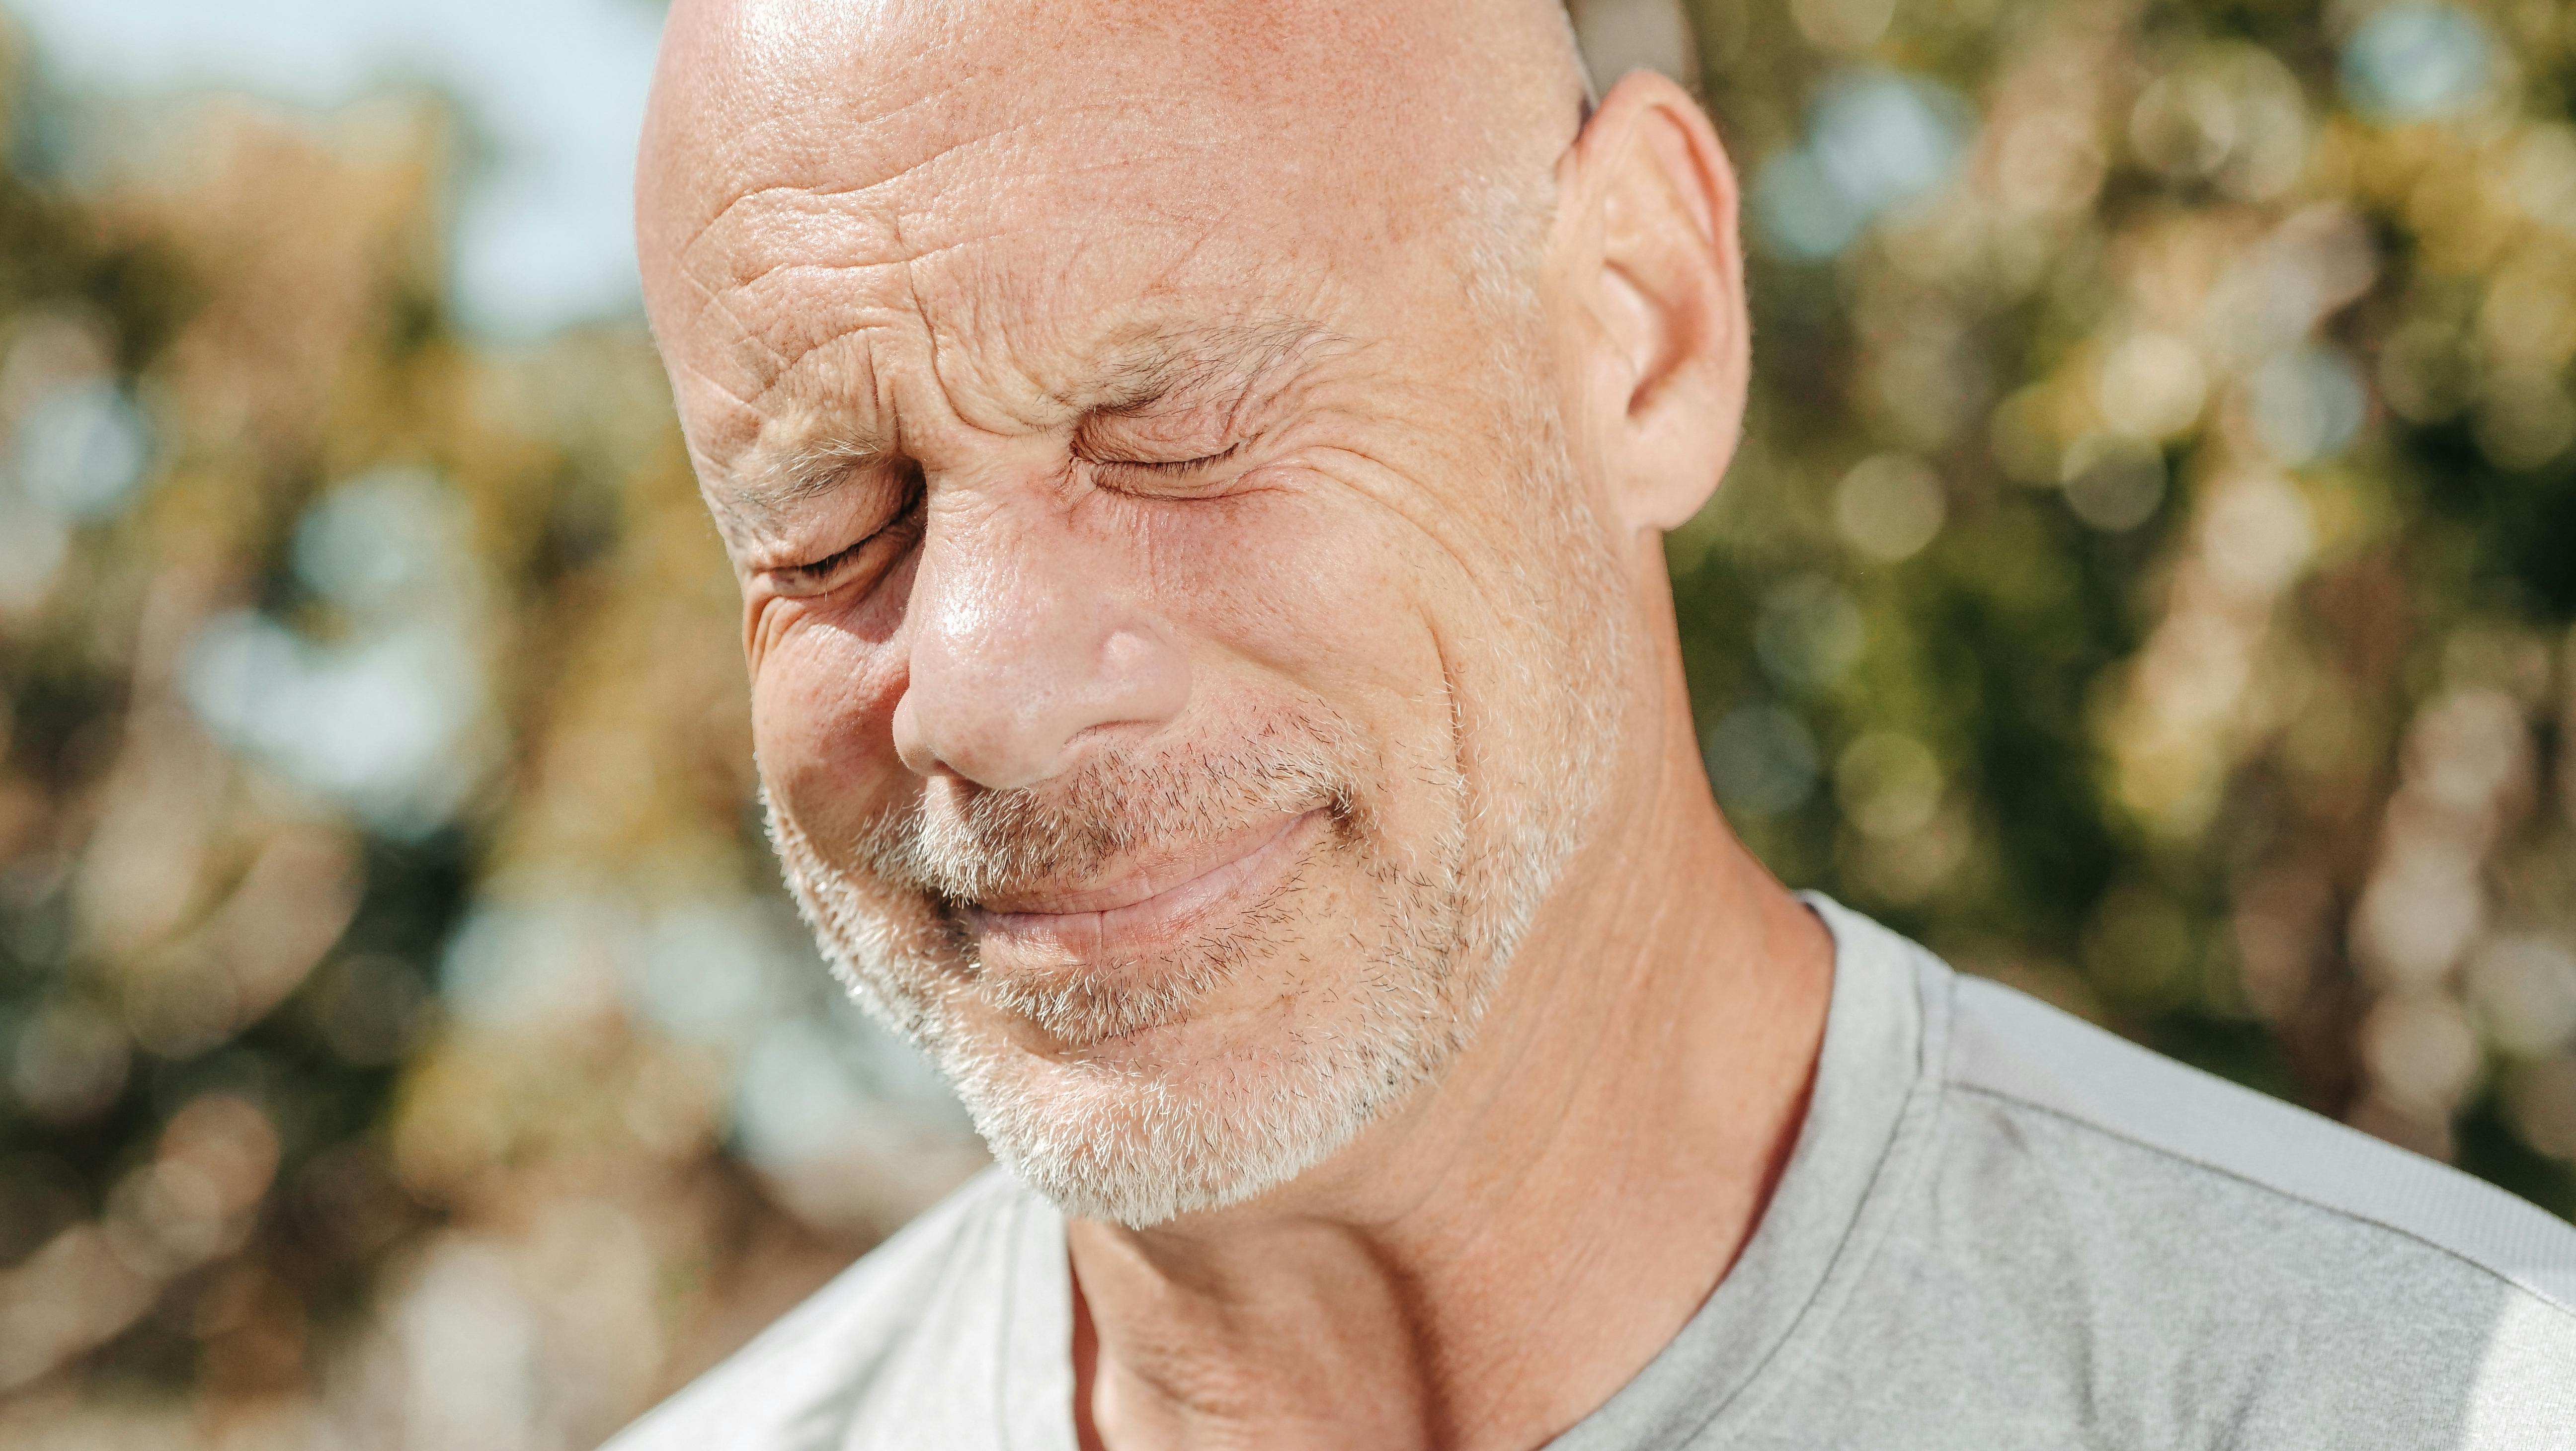 An old man who is feeling unwell. | Photo: Pexels